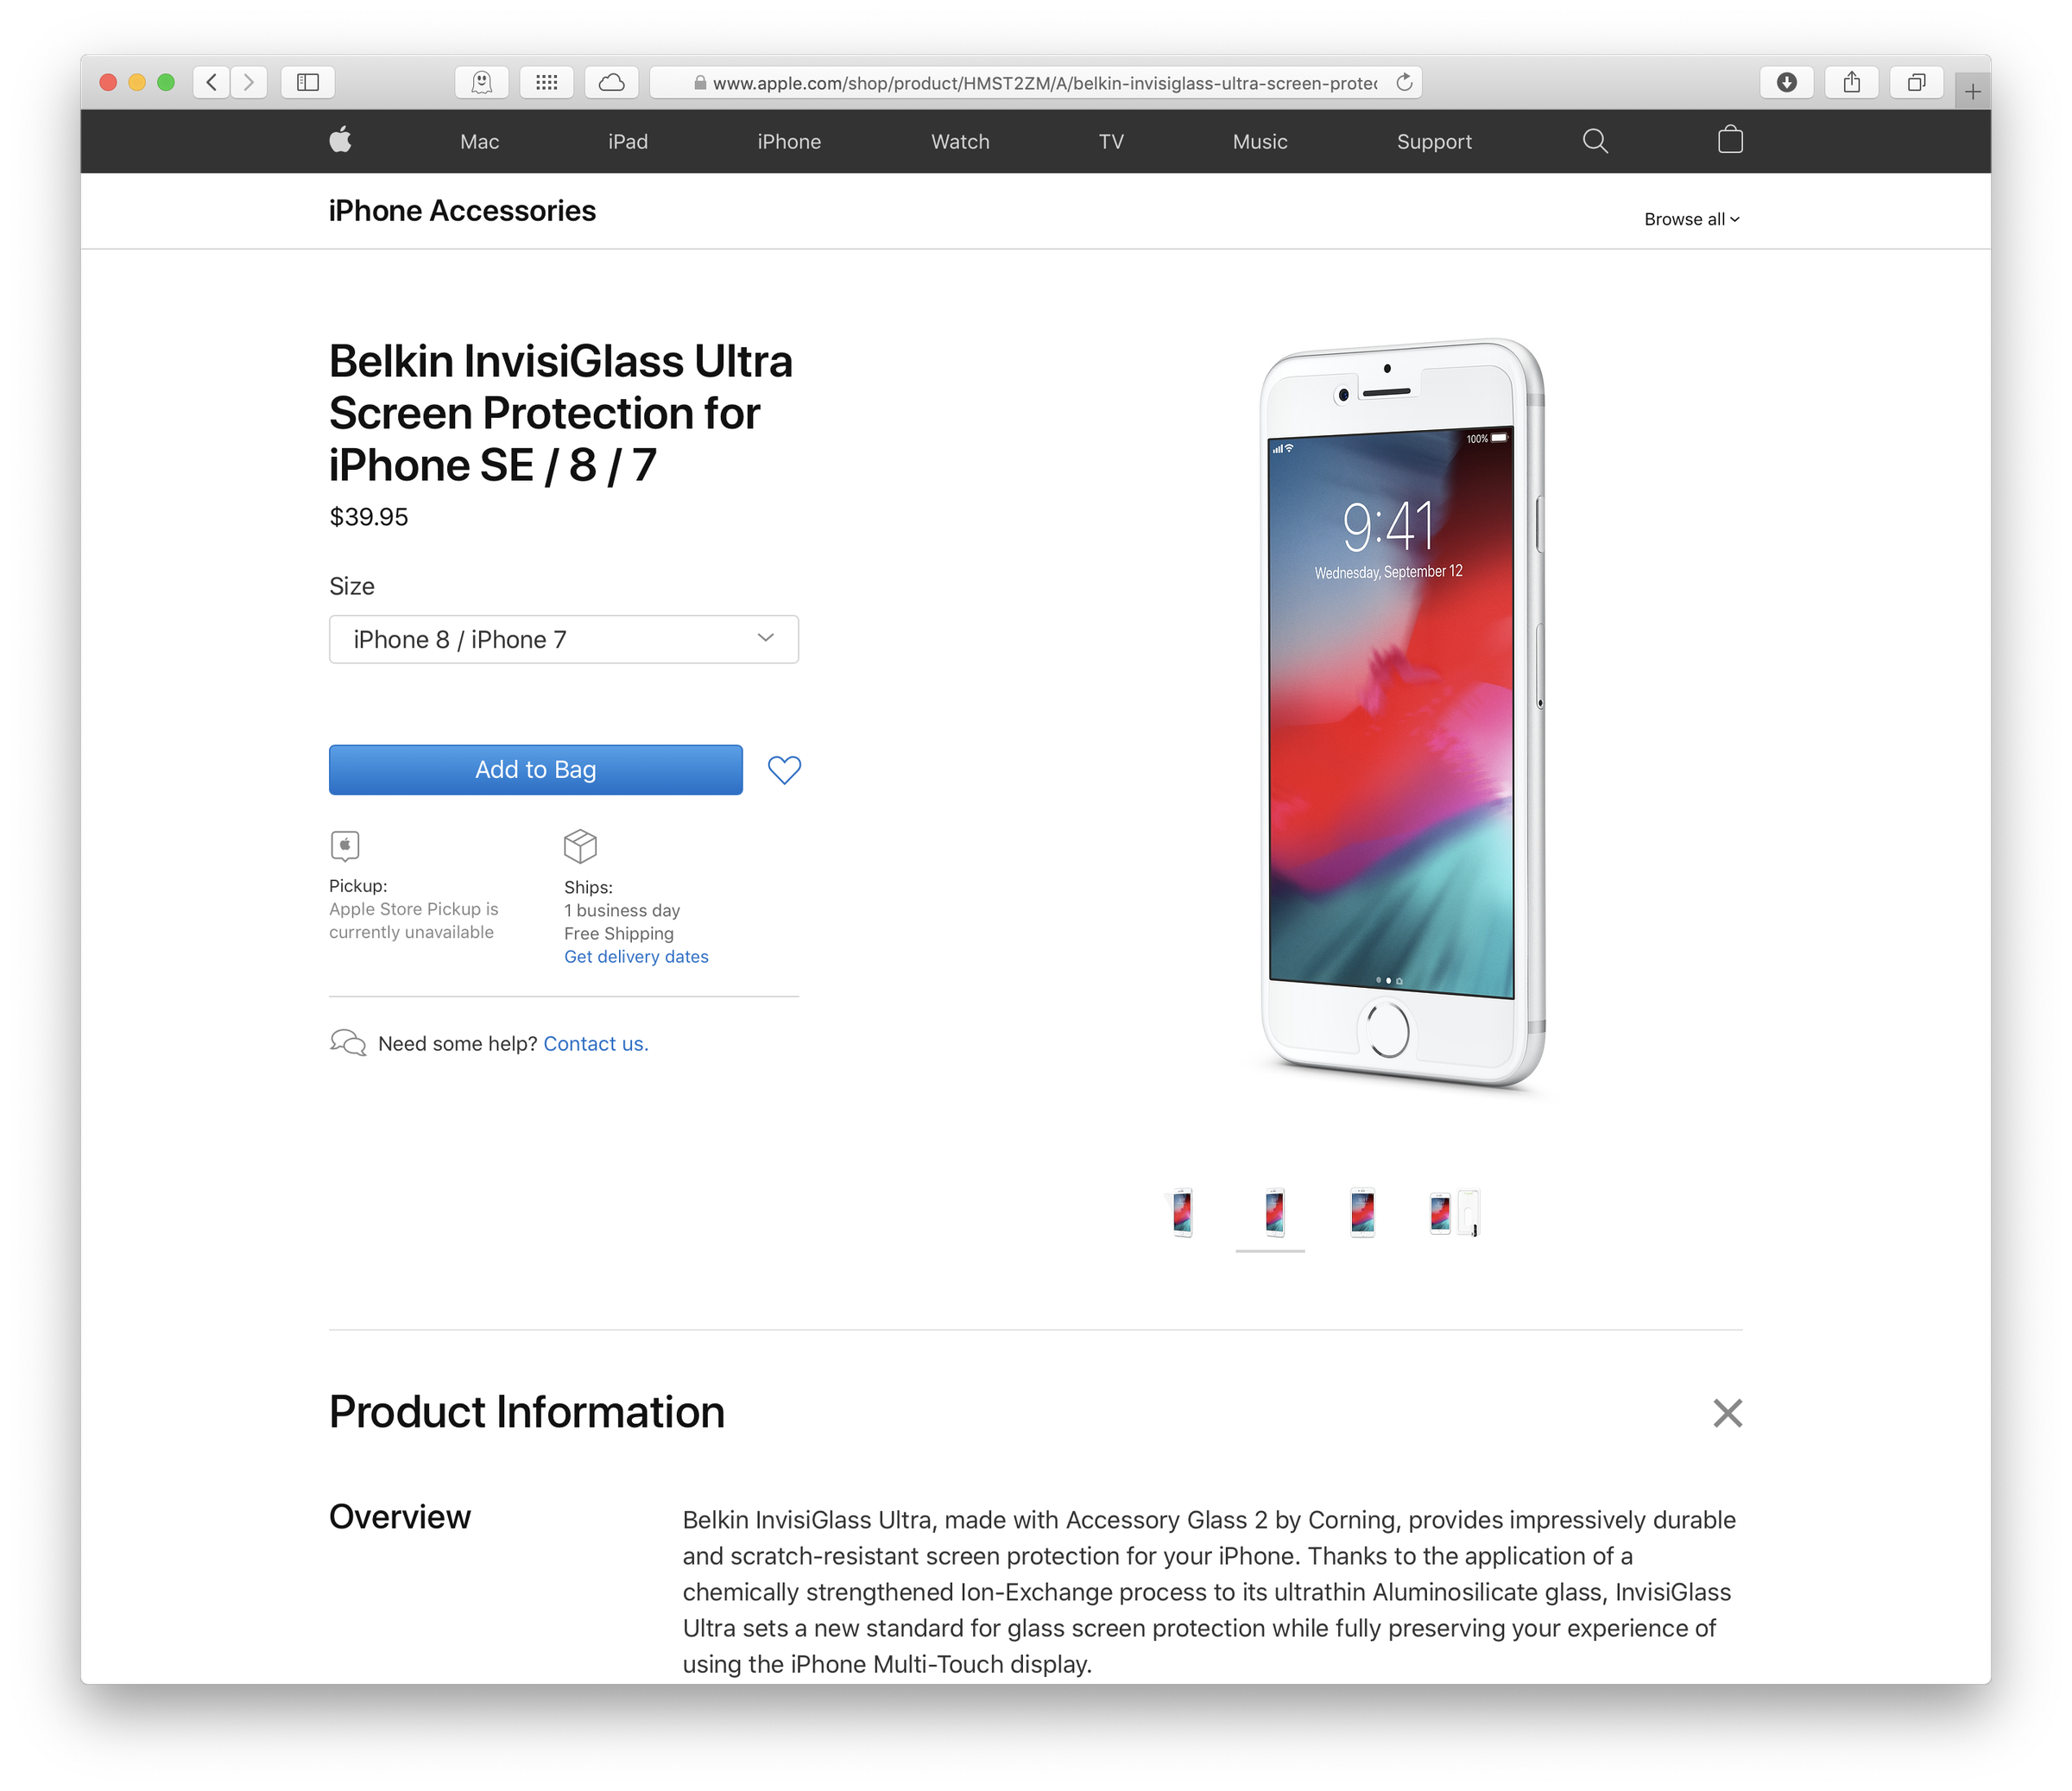 How the page appeared early on Friday before Apple removed mention of the SE model.